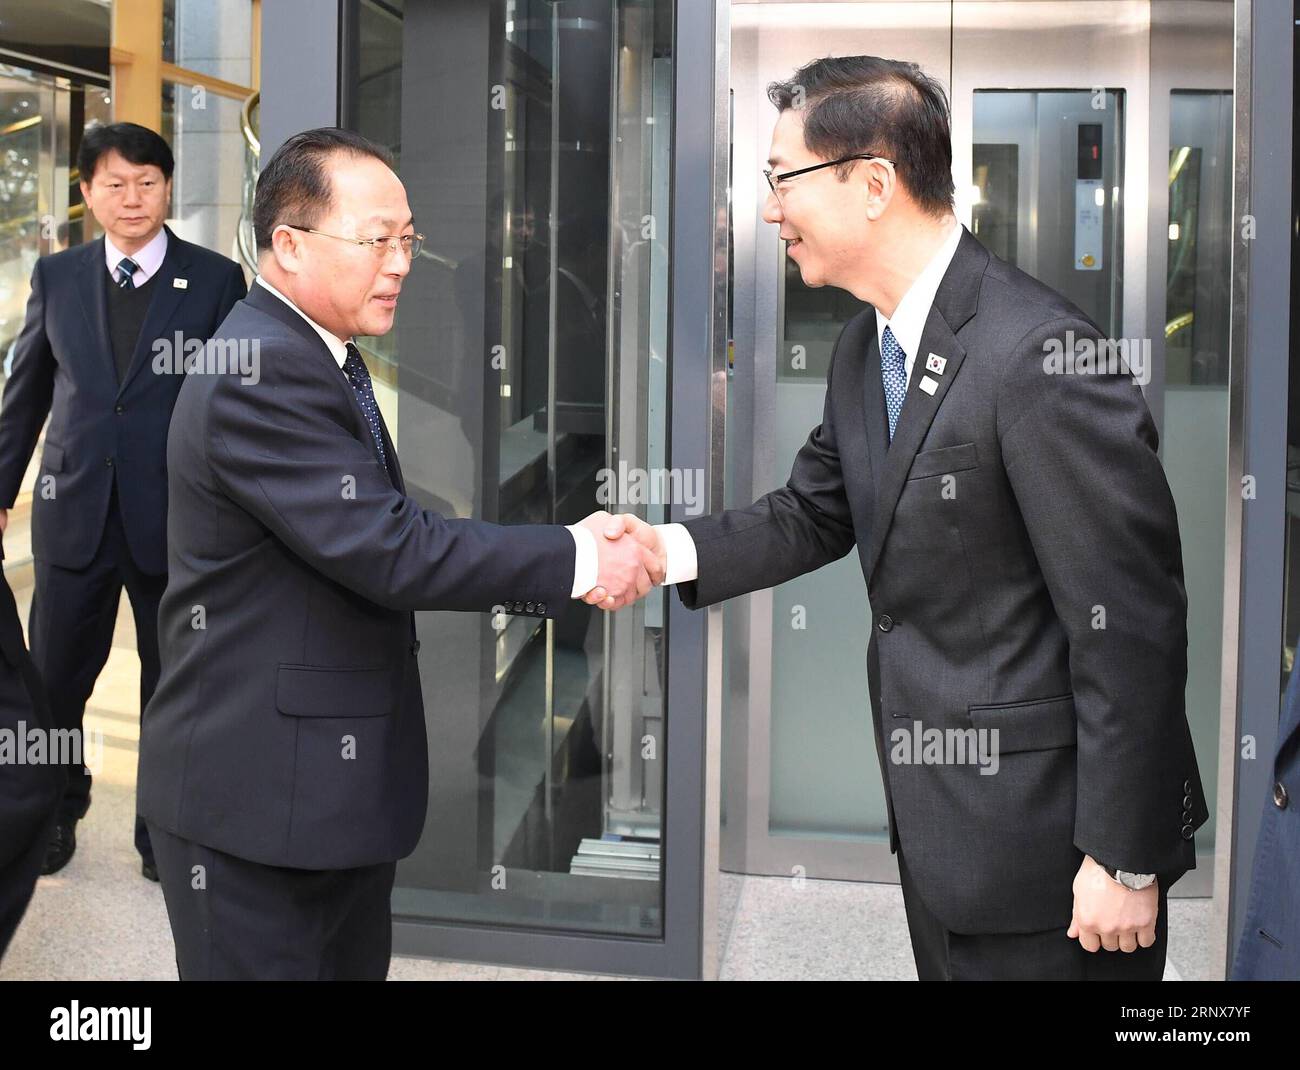 (180117) -- SEOUL, Jan. 17, 2018 () -- Chun Hae-sung (R), vice unification minister of South Korea, shakes hands with Jon Jong Su, vice chairman of the Committee for the Peaceful Reunification of the Fatherland of the Democratic People s Republic of Korea (DPRK), at the truce village of Panmunjom, Jan. 17, 2018. Working-level talks between South Korea and DPRK were underway Wednesday at the truce village of Panmunjom to discuss the DPRK s dispatch of athletes to the South Korea-hosted Winter Olympics, Seoul s Unification Ministry said. (/South Korean Unification Ministry) (psw) SOUTH KOREA-DPR Stock Photo